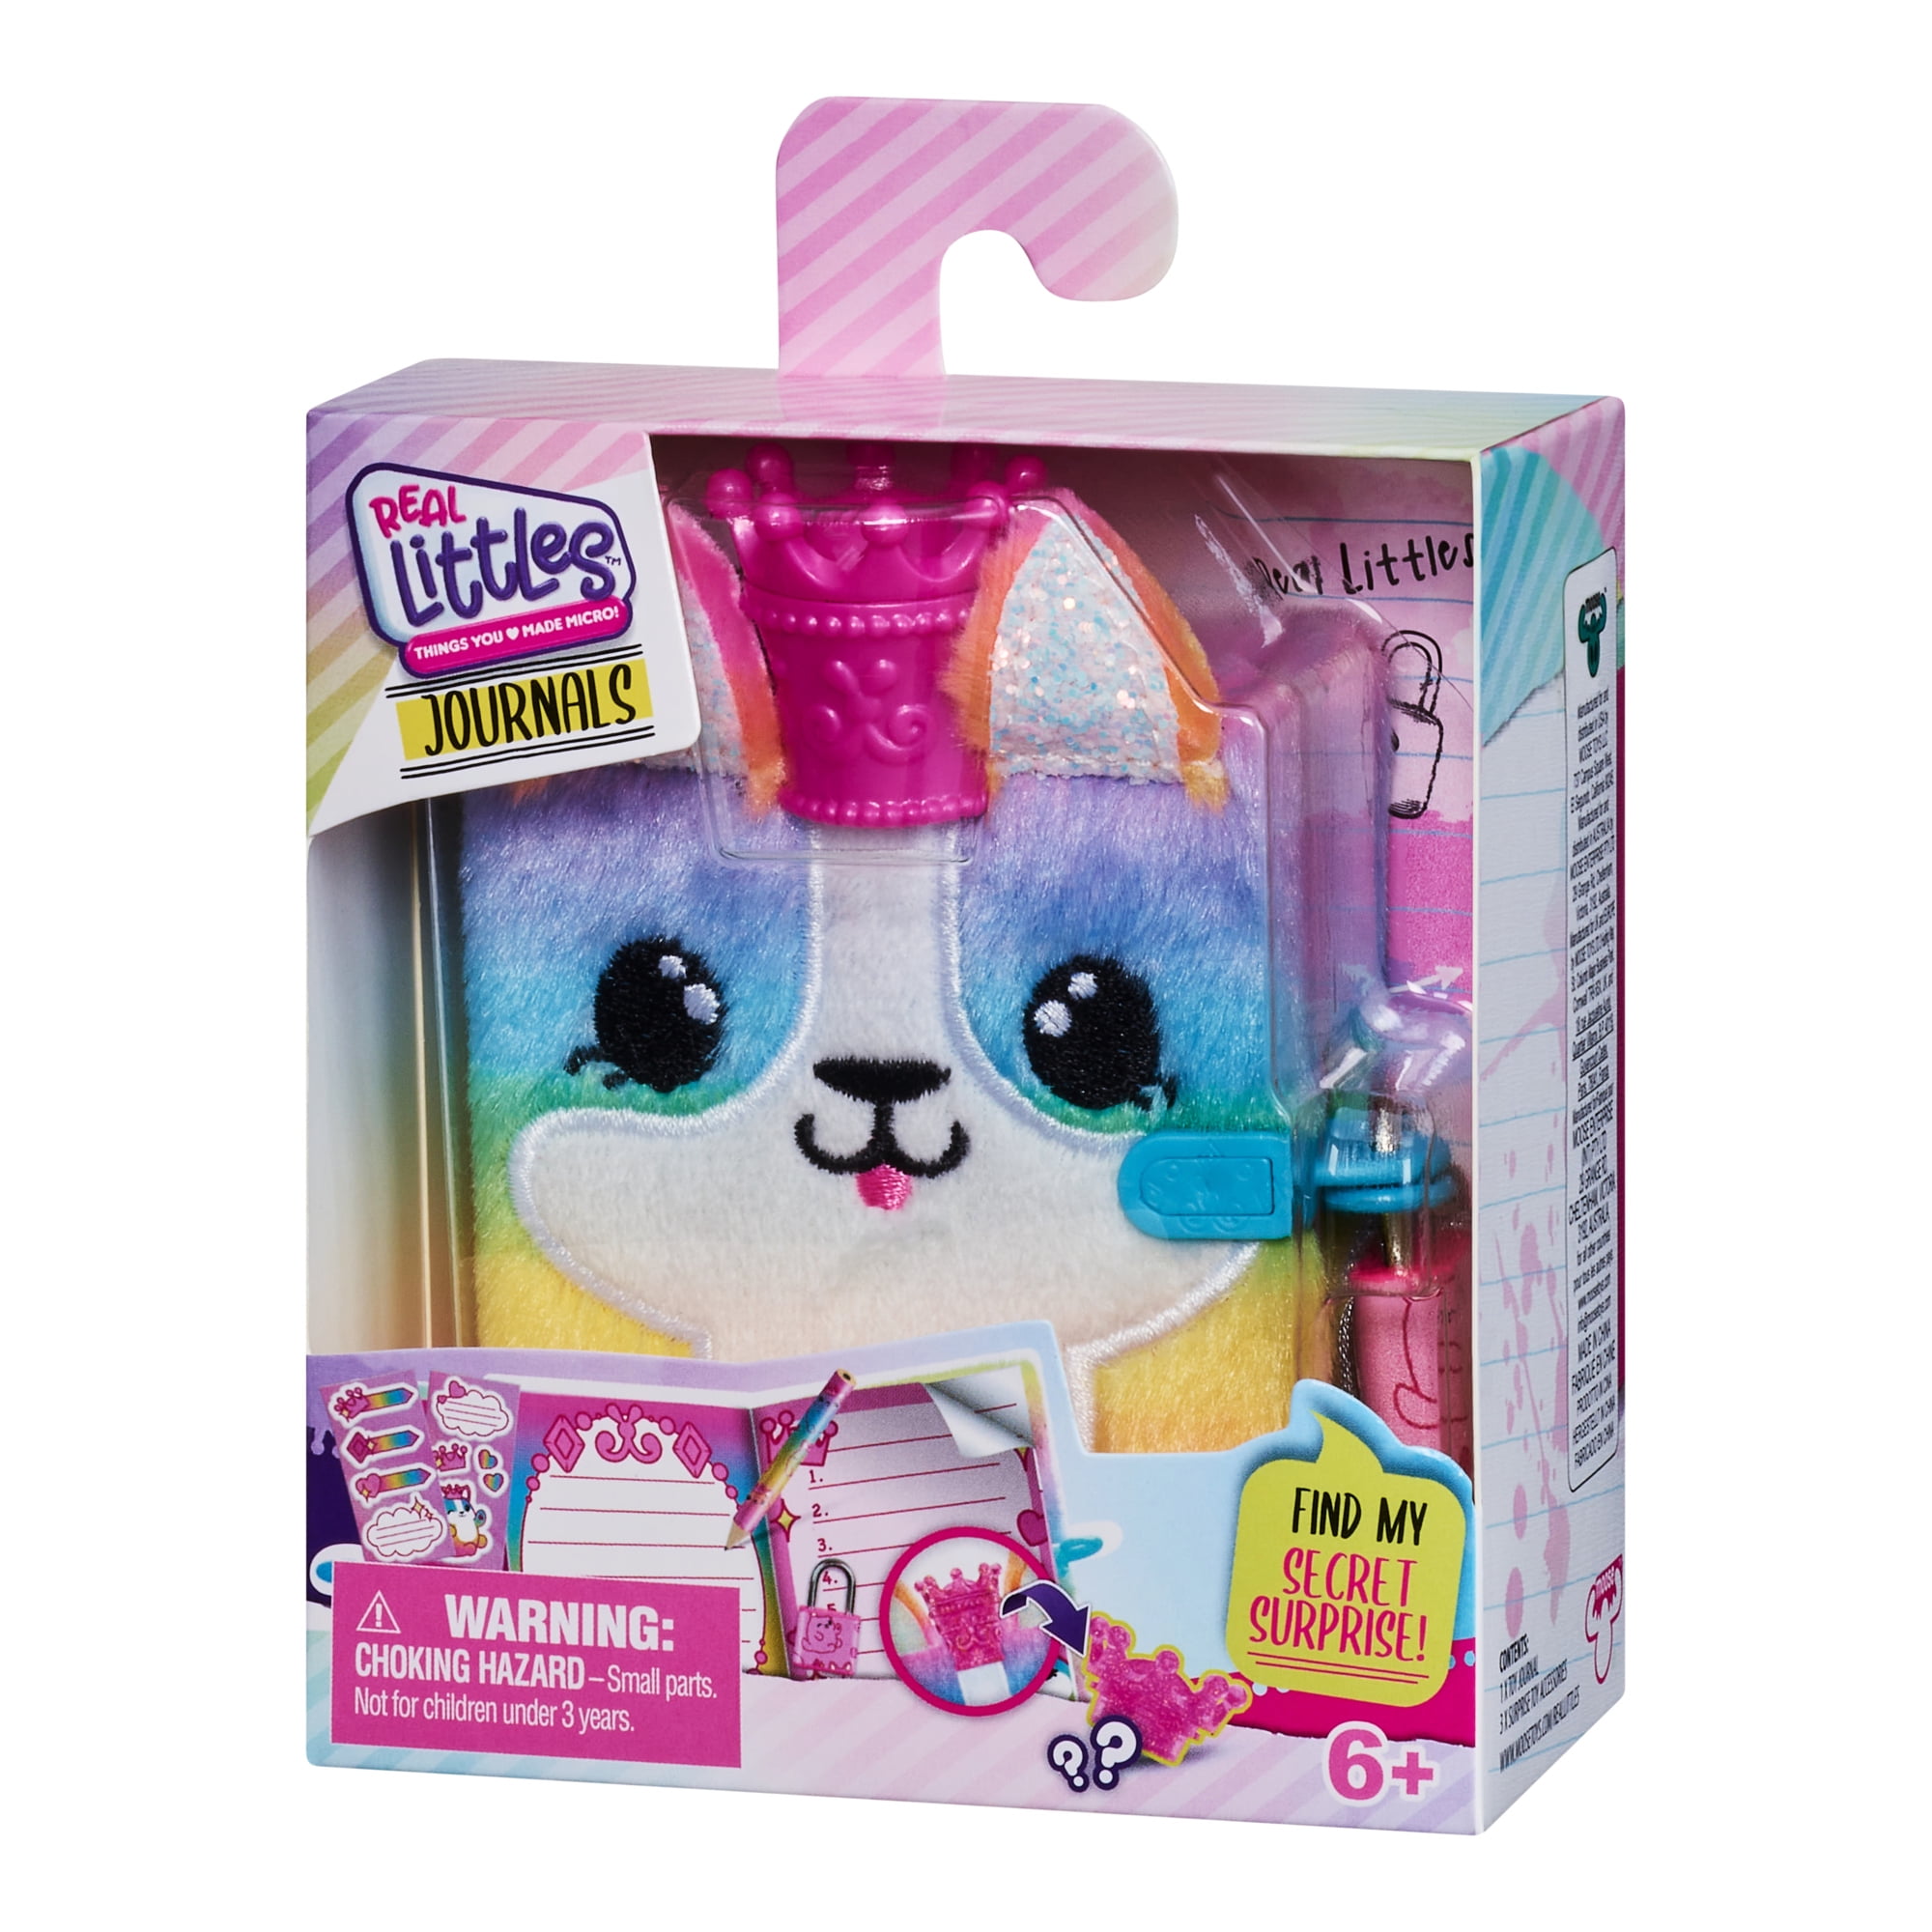 Small Is Savvy with the New Real Littles Line - The Toy Insider